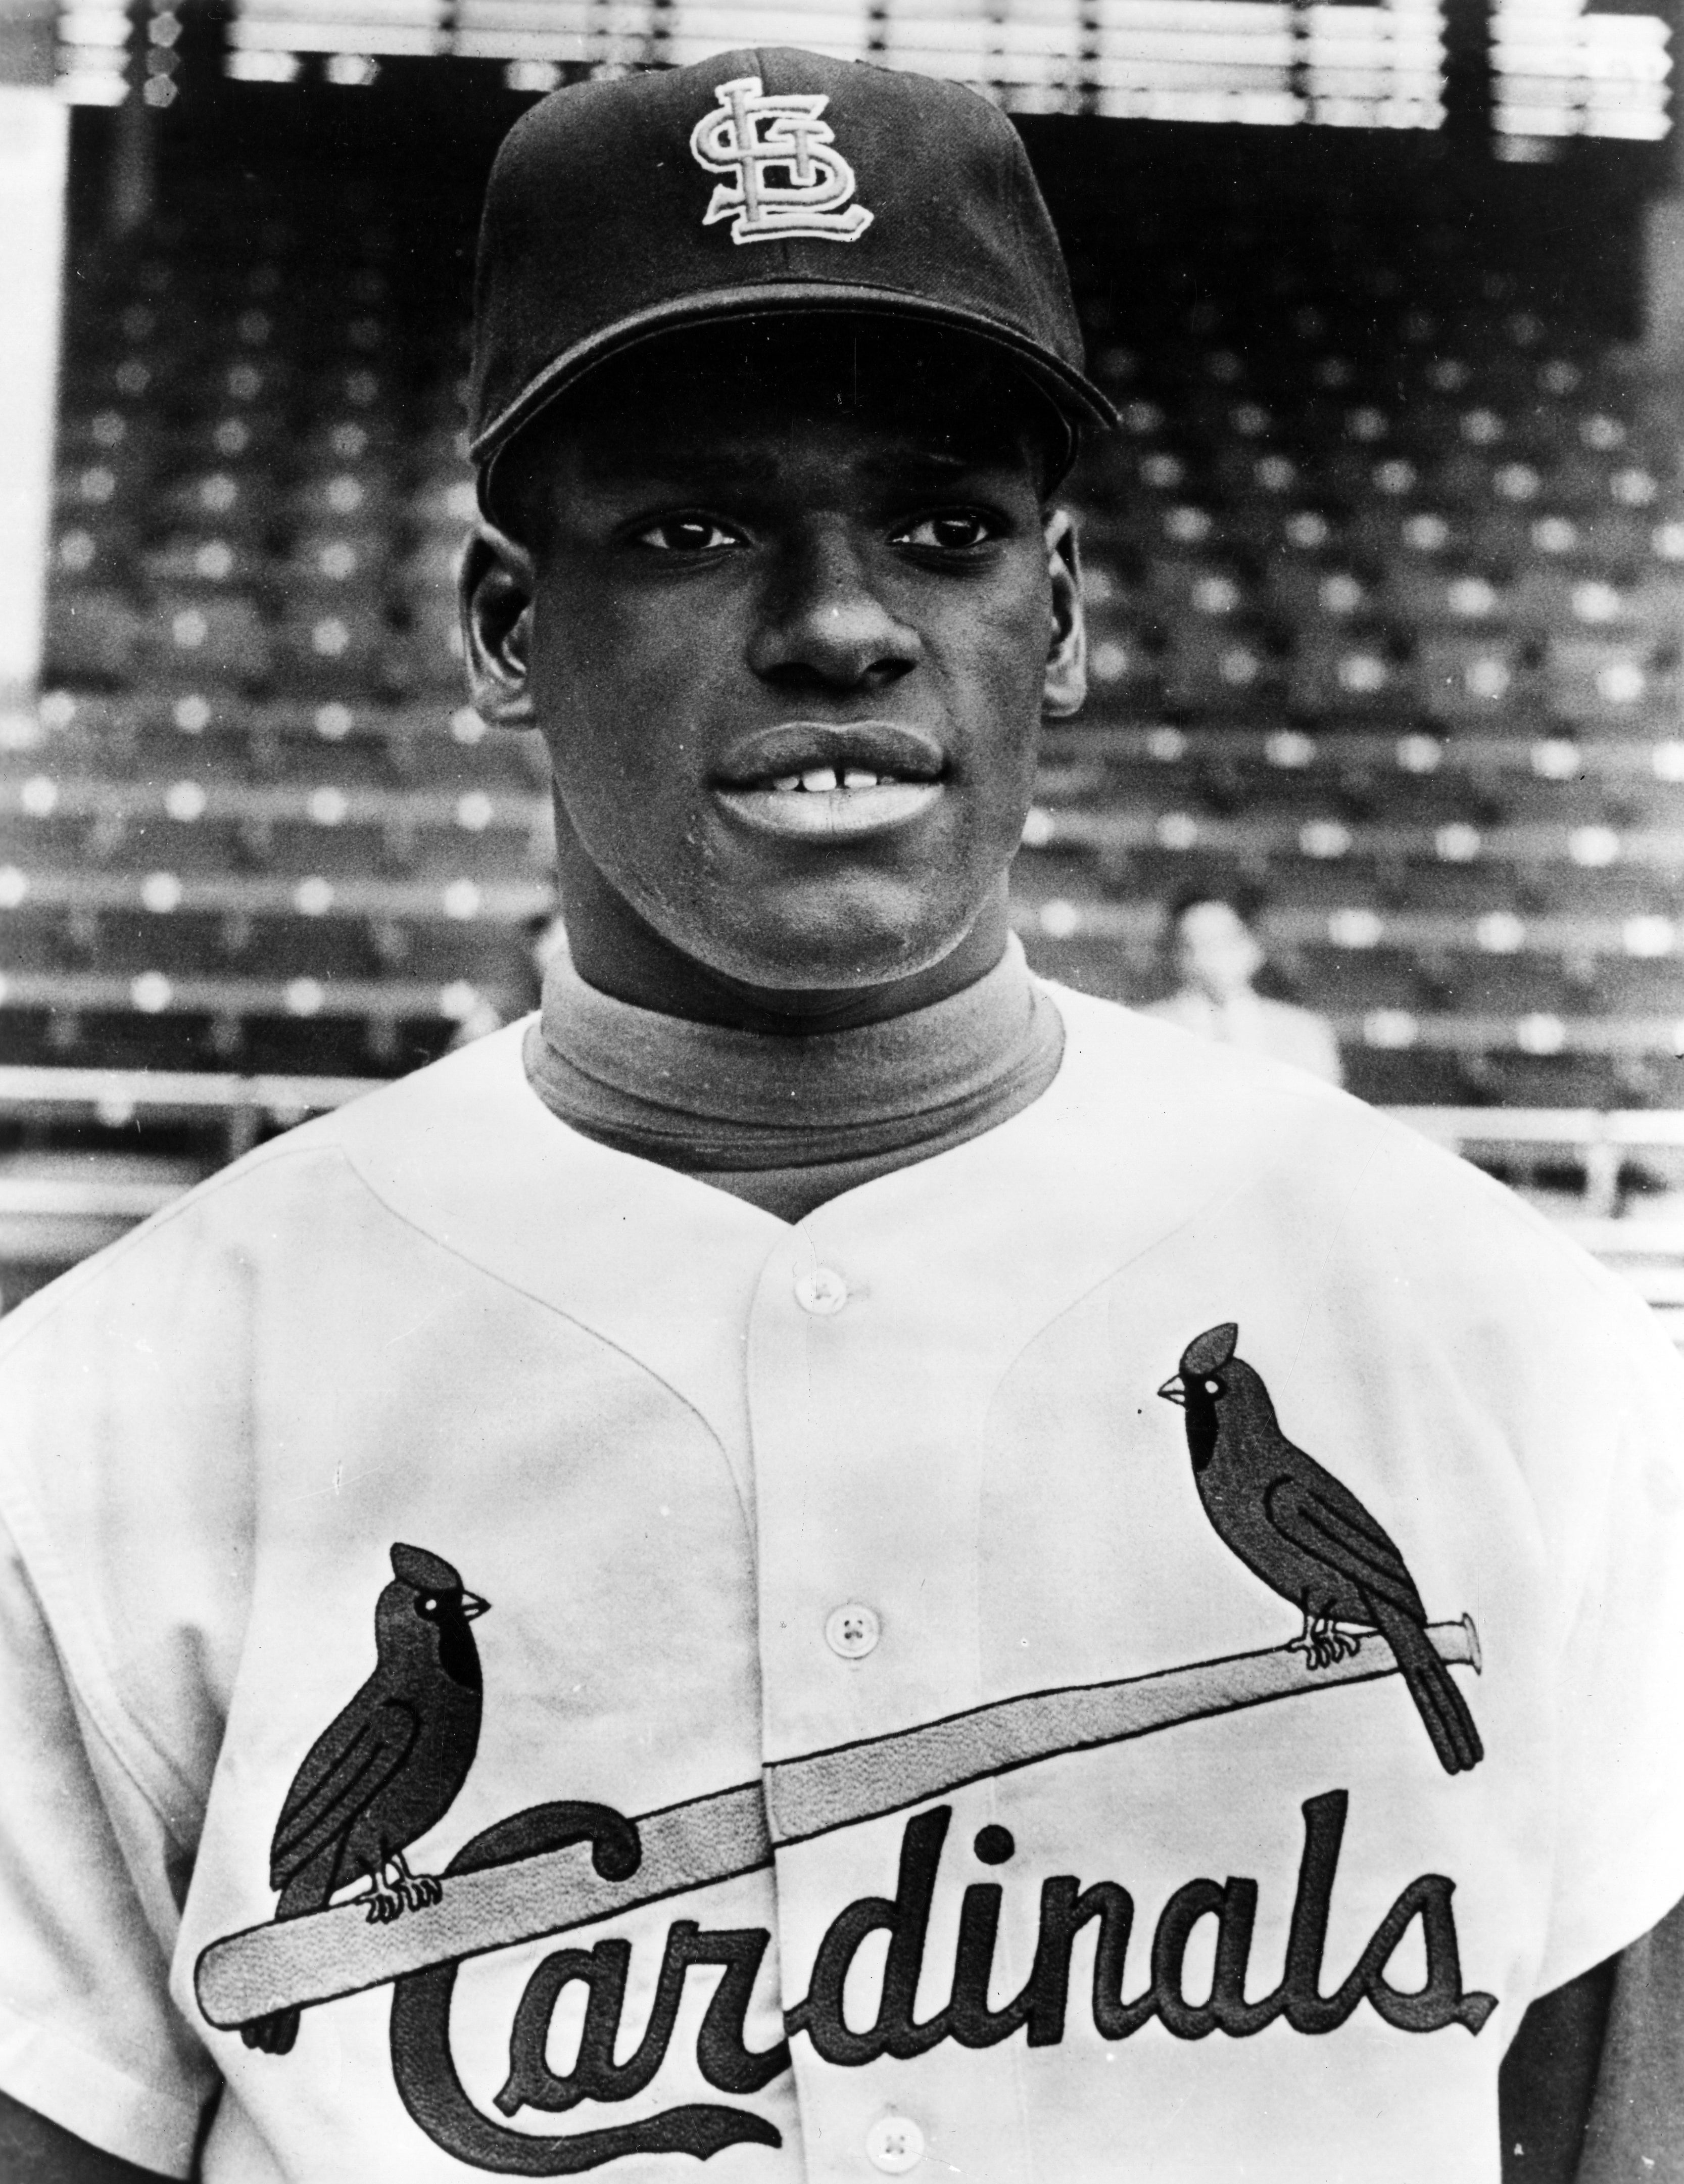 Many mourning the death of Cardinals Hall of Famer Bob Gibson